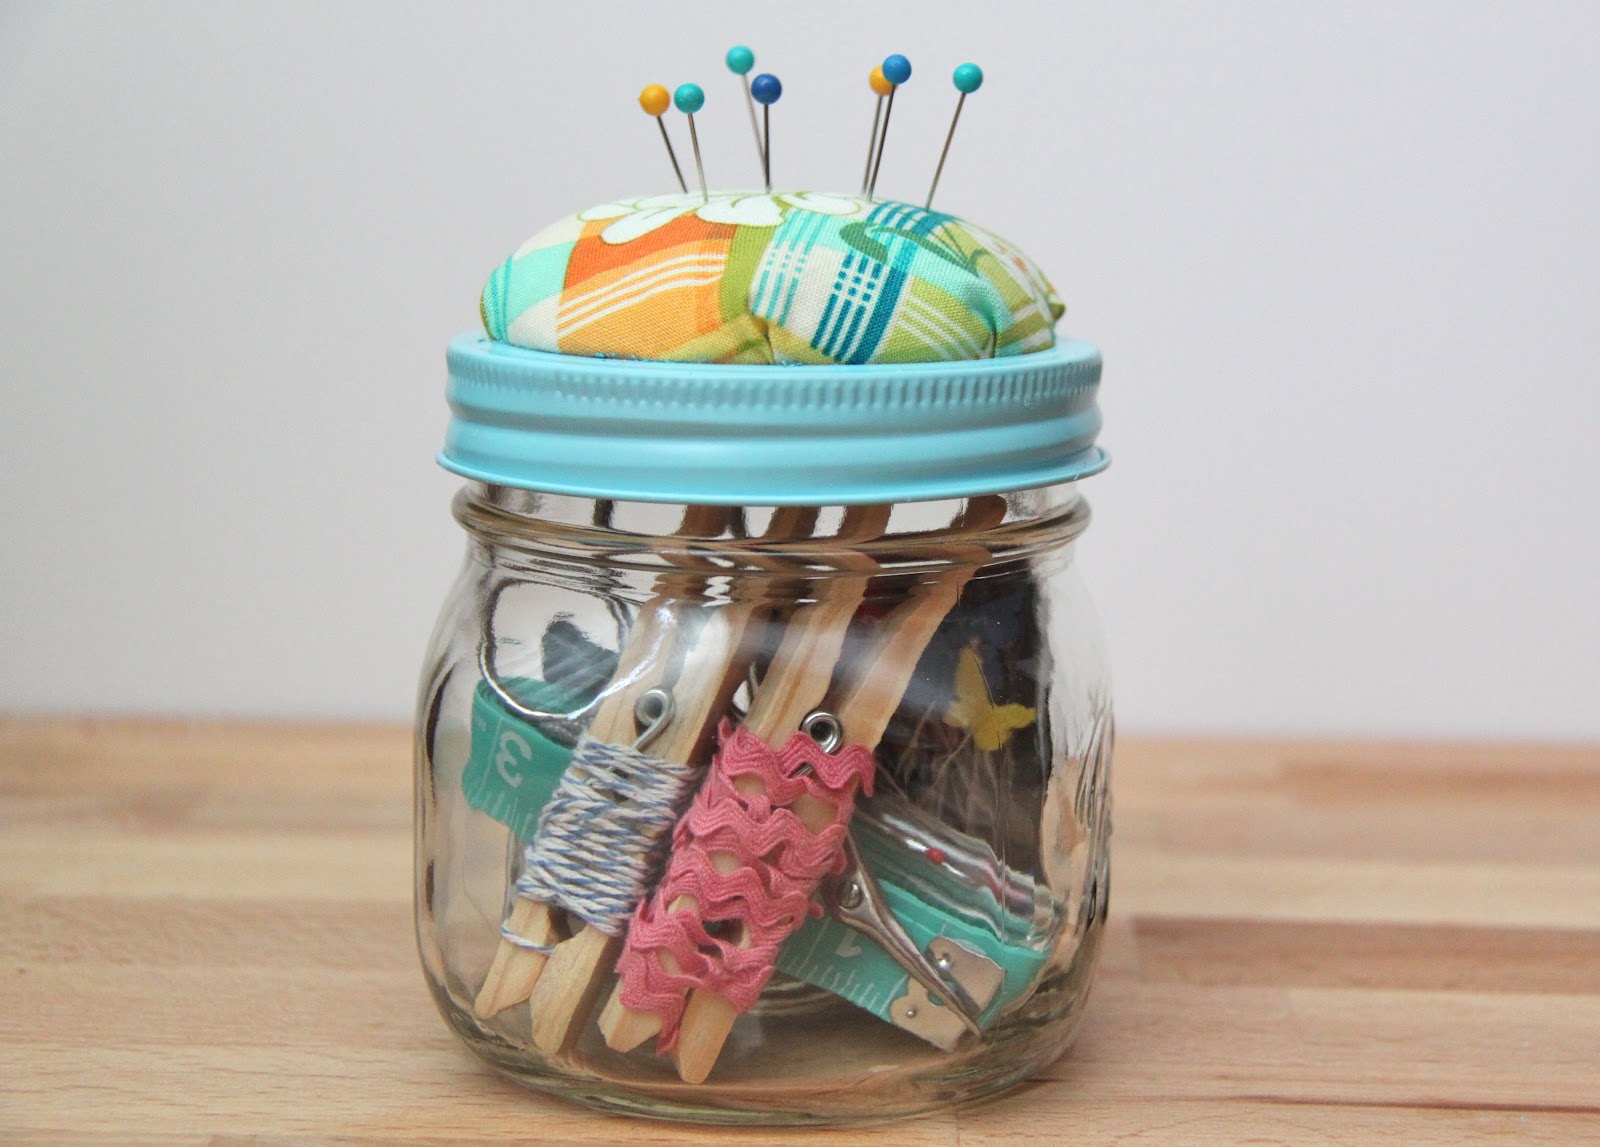 Sewing kits for beginners : What You Should Include 